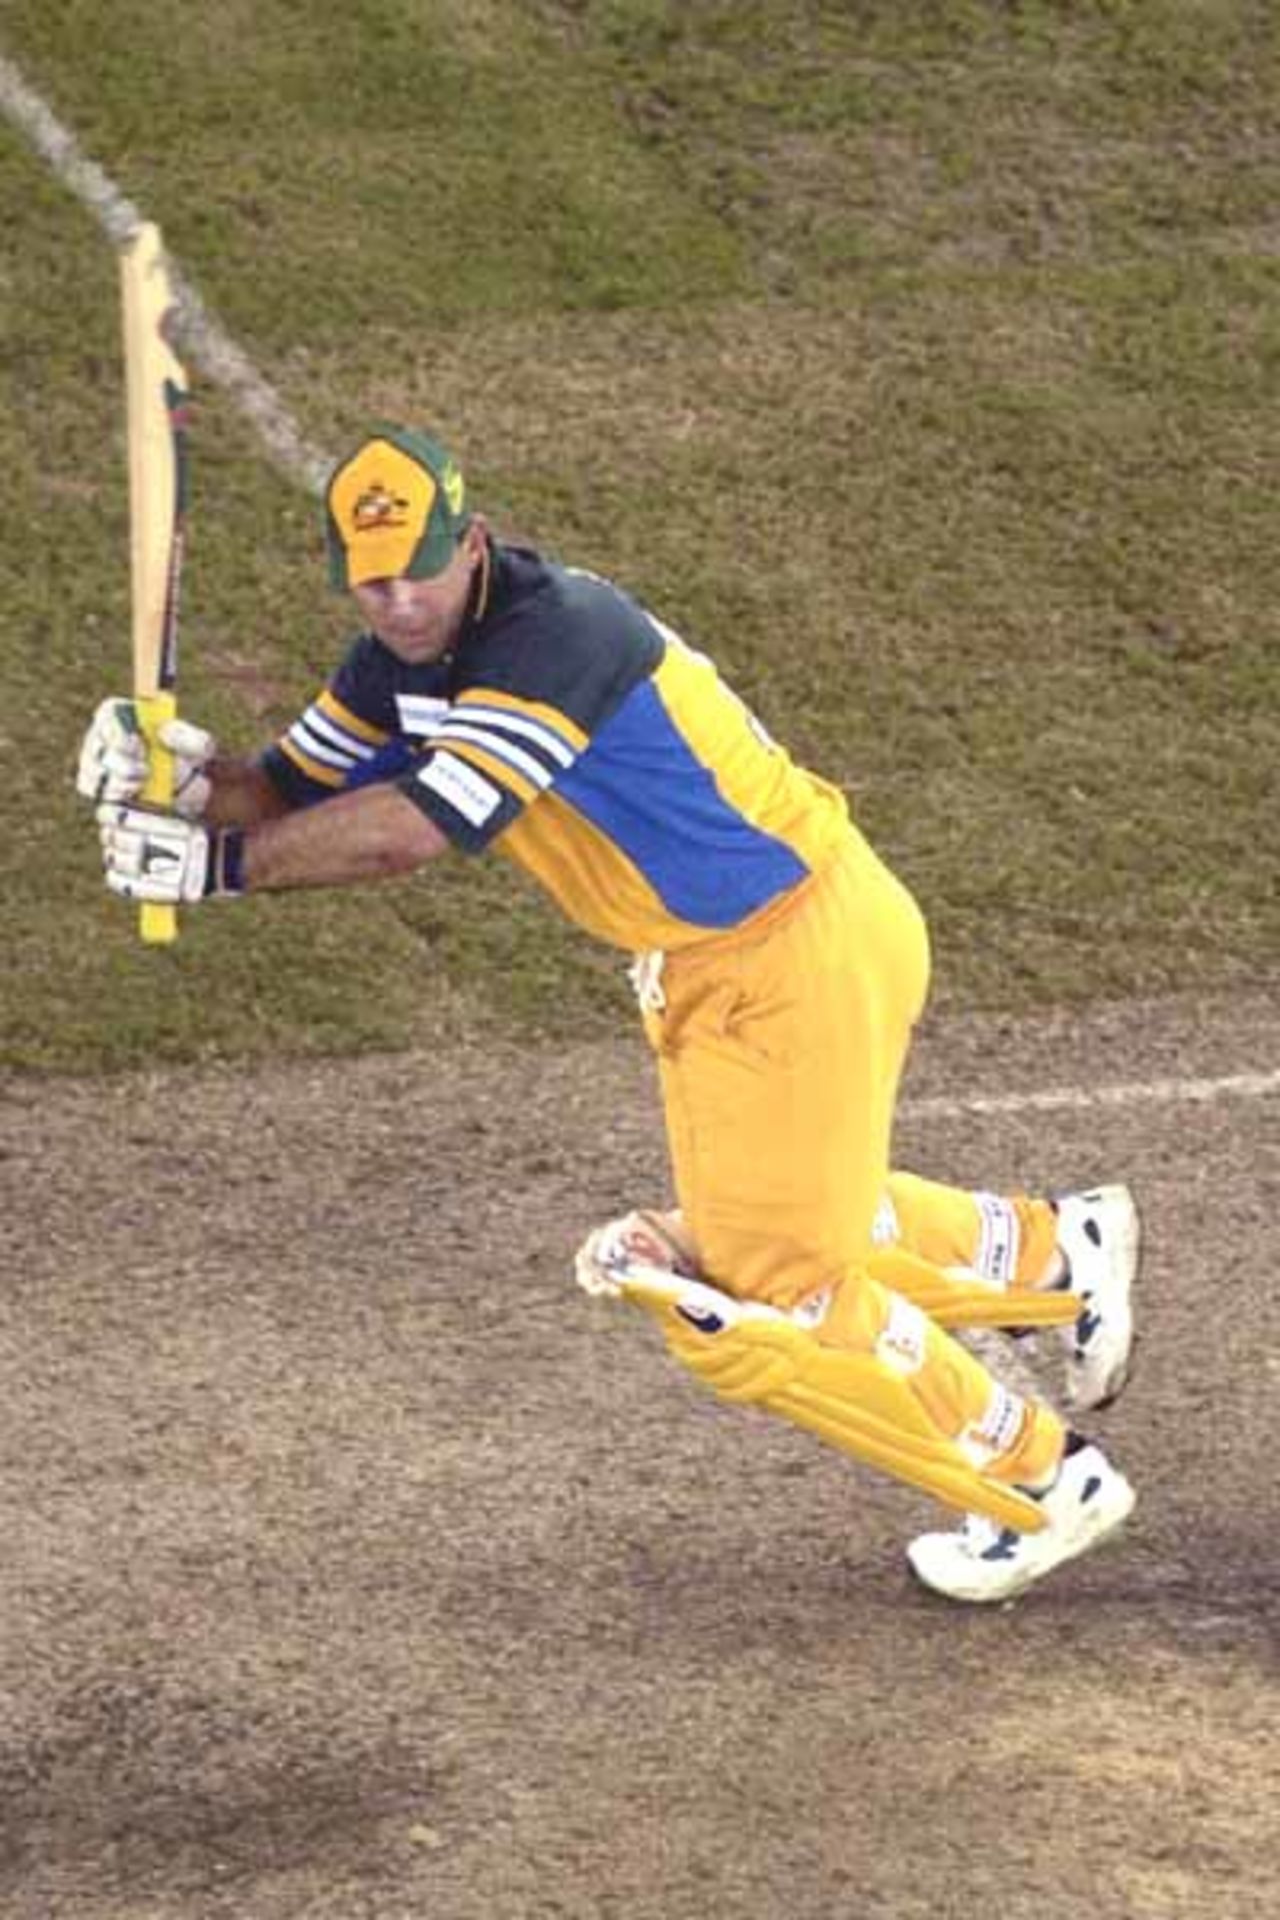 18 Aug 2000: Ricky Ponting of Australia hits one away in the match between Australia and South Africa, in game two of the Super Challenge 2000 played at the Colonial Stadium, Melbourne, Australia.